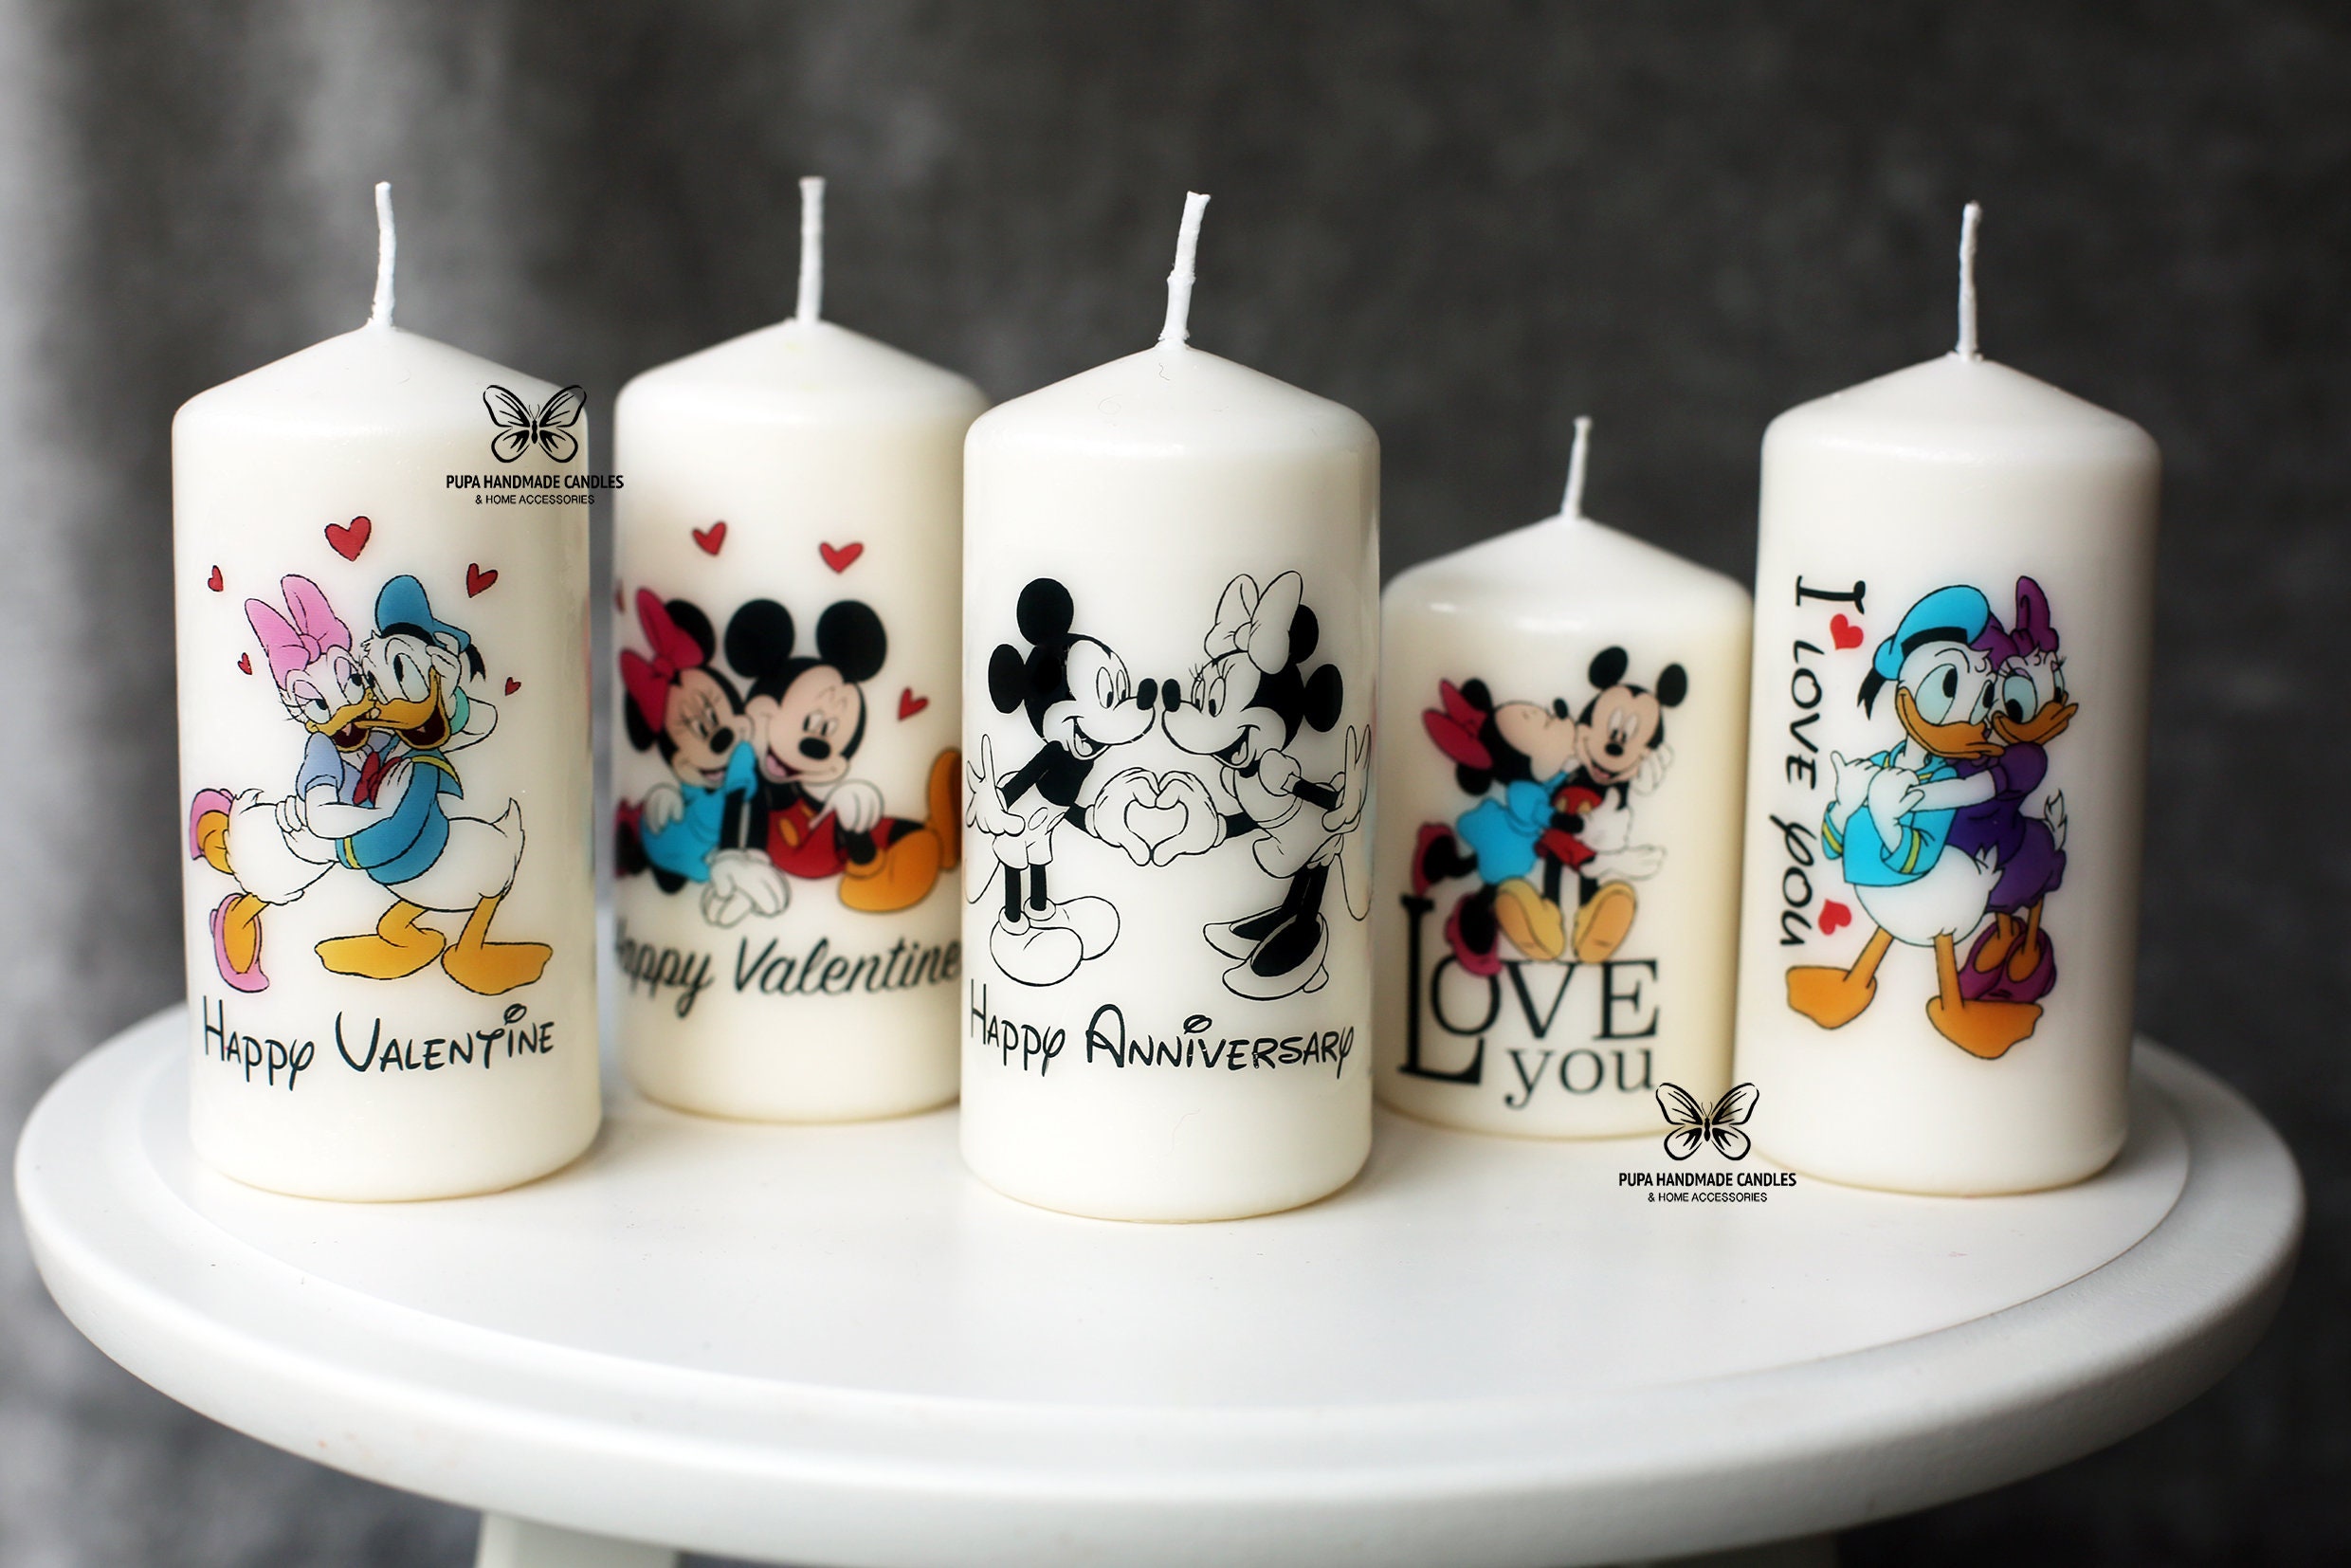  Homesick Disney Mickey Mouse Scented Candle - Scents of Italian  Mandarin, Peppercorn, Apple Peel, 13.75 oz, 60-80 Hour Burn, Disney  Inspired Candle/Gift, Disney Home Decor, Aromatherapy Candle : Home &  Kitchen